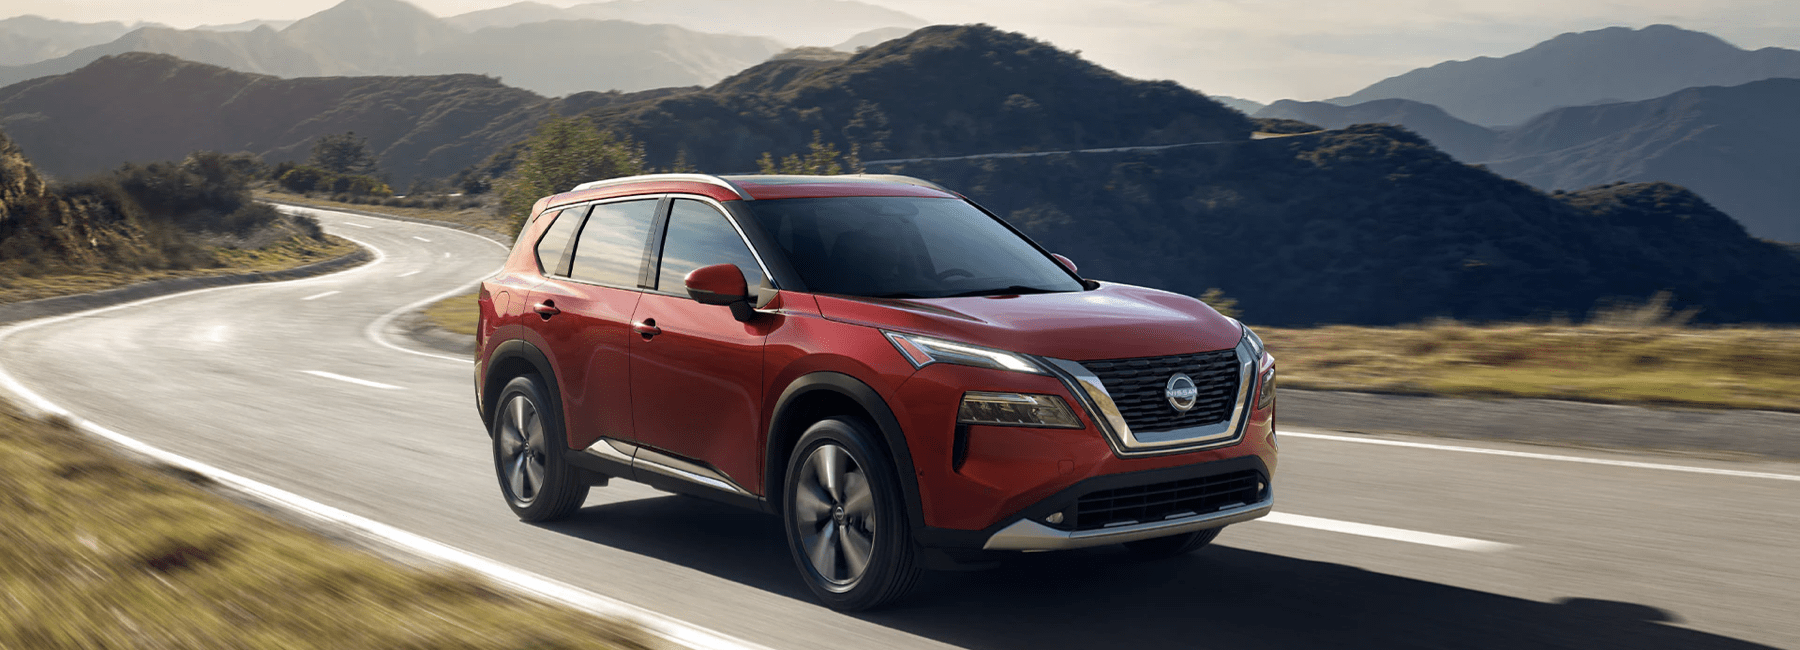 2023-Nissan-rogue-mountains-in-distance